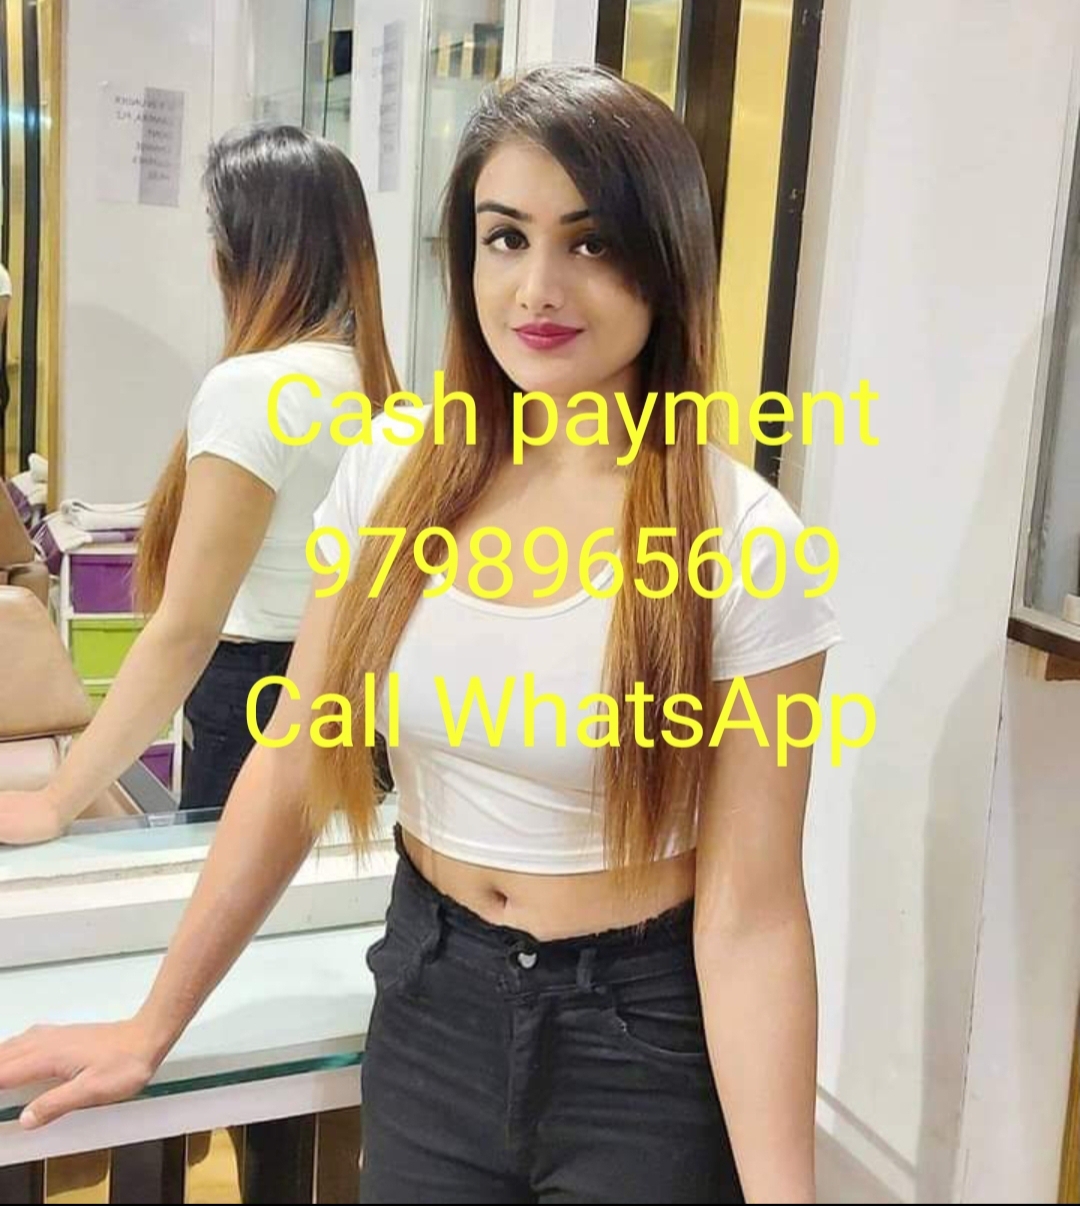 Aundh I call girl anytime available low price VIP model